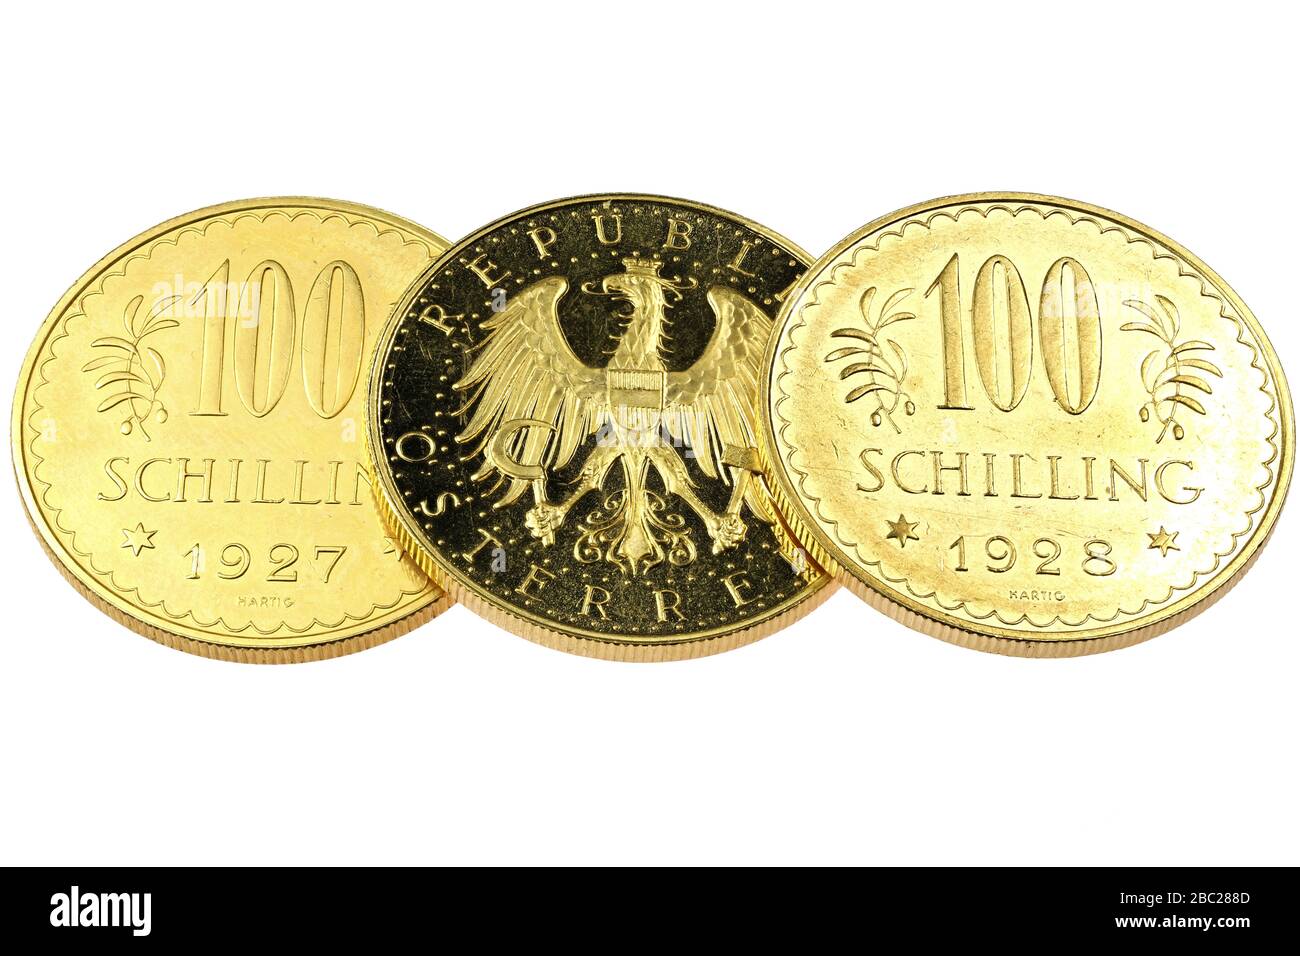 Austrian 100 Schilling gold coins isolated on white background Stock Photo